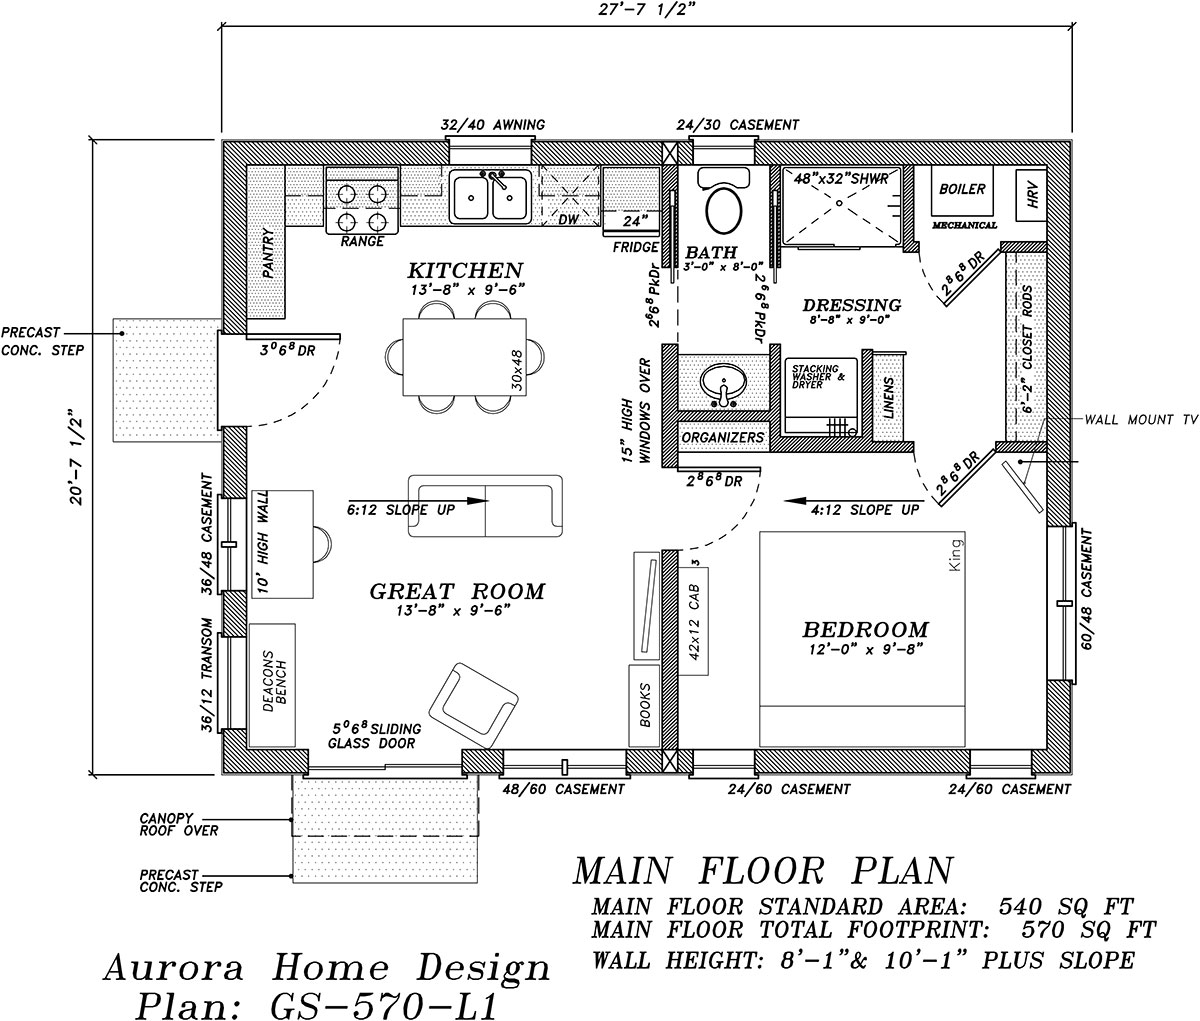 570 sq ft Stand Alone Garden Suite - Vaulted Ceilings | Aurora Home Designs